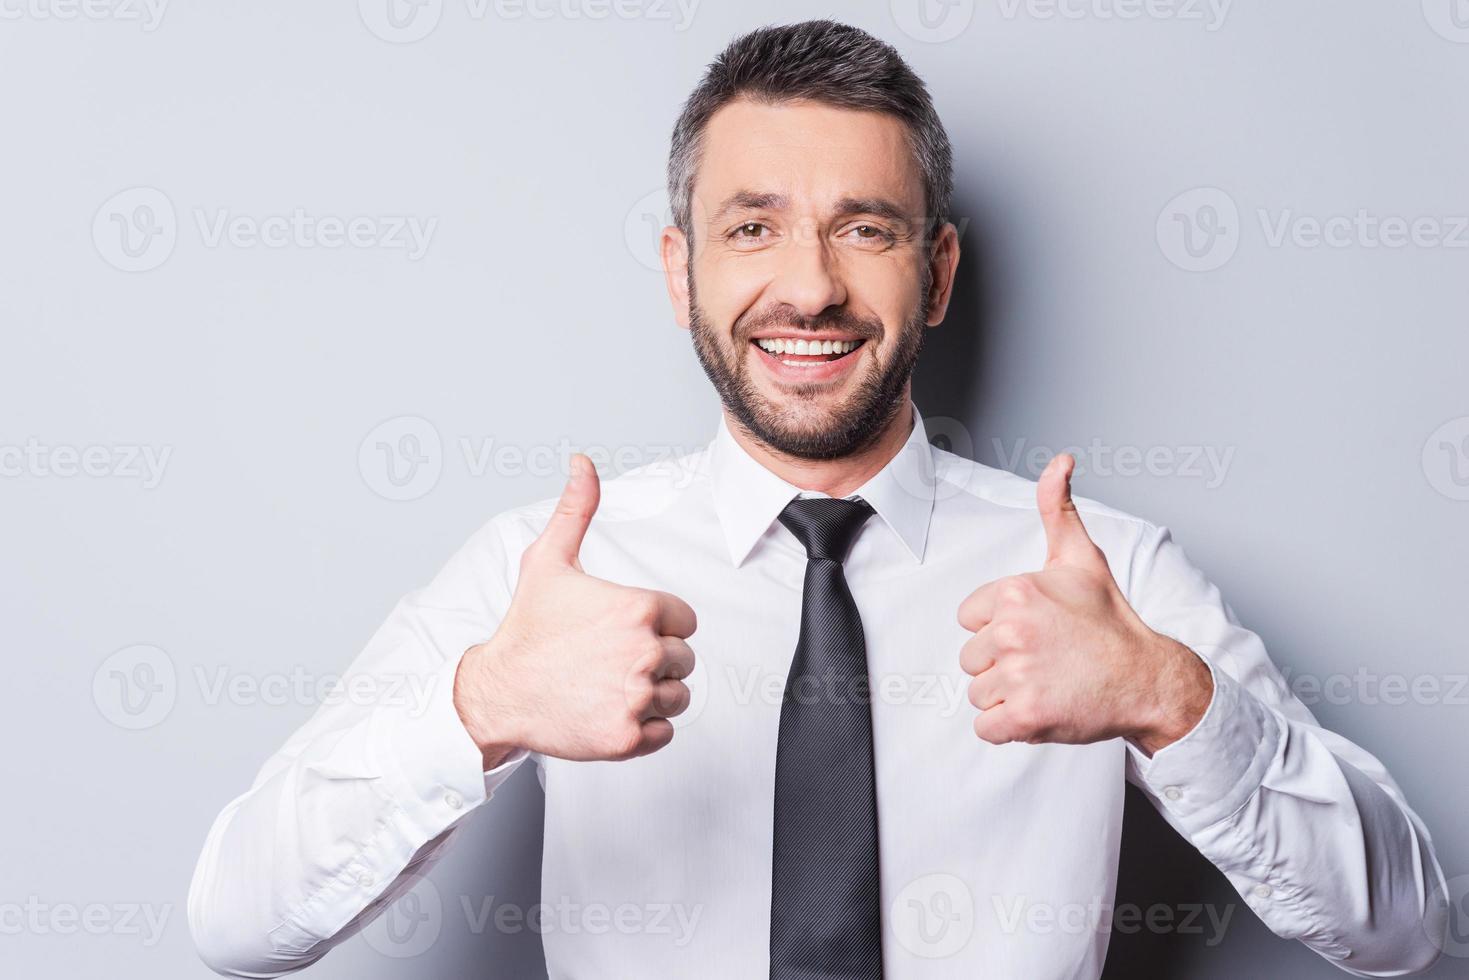 Thumbs up for success Happy mature man in shirt and tie showing his thumbs up and smiling while standing against grey background photo